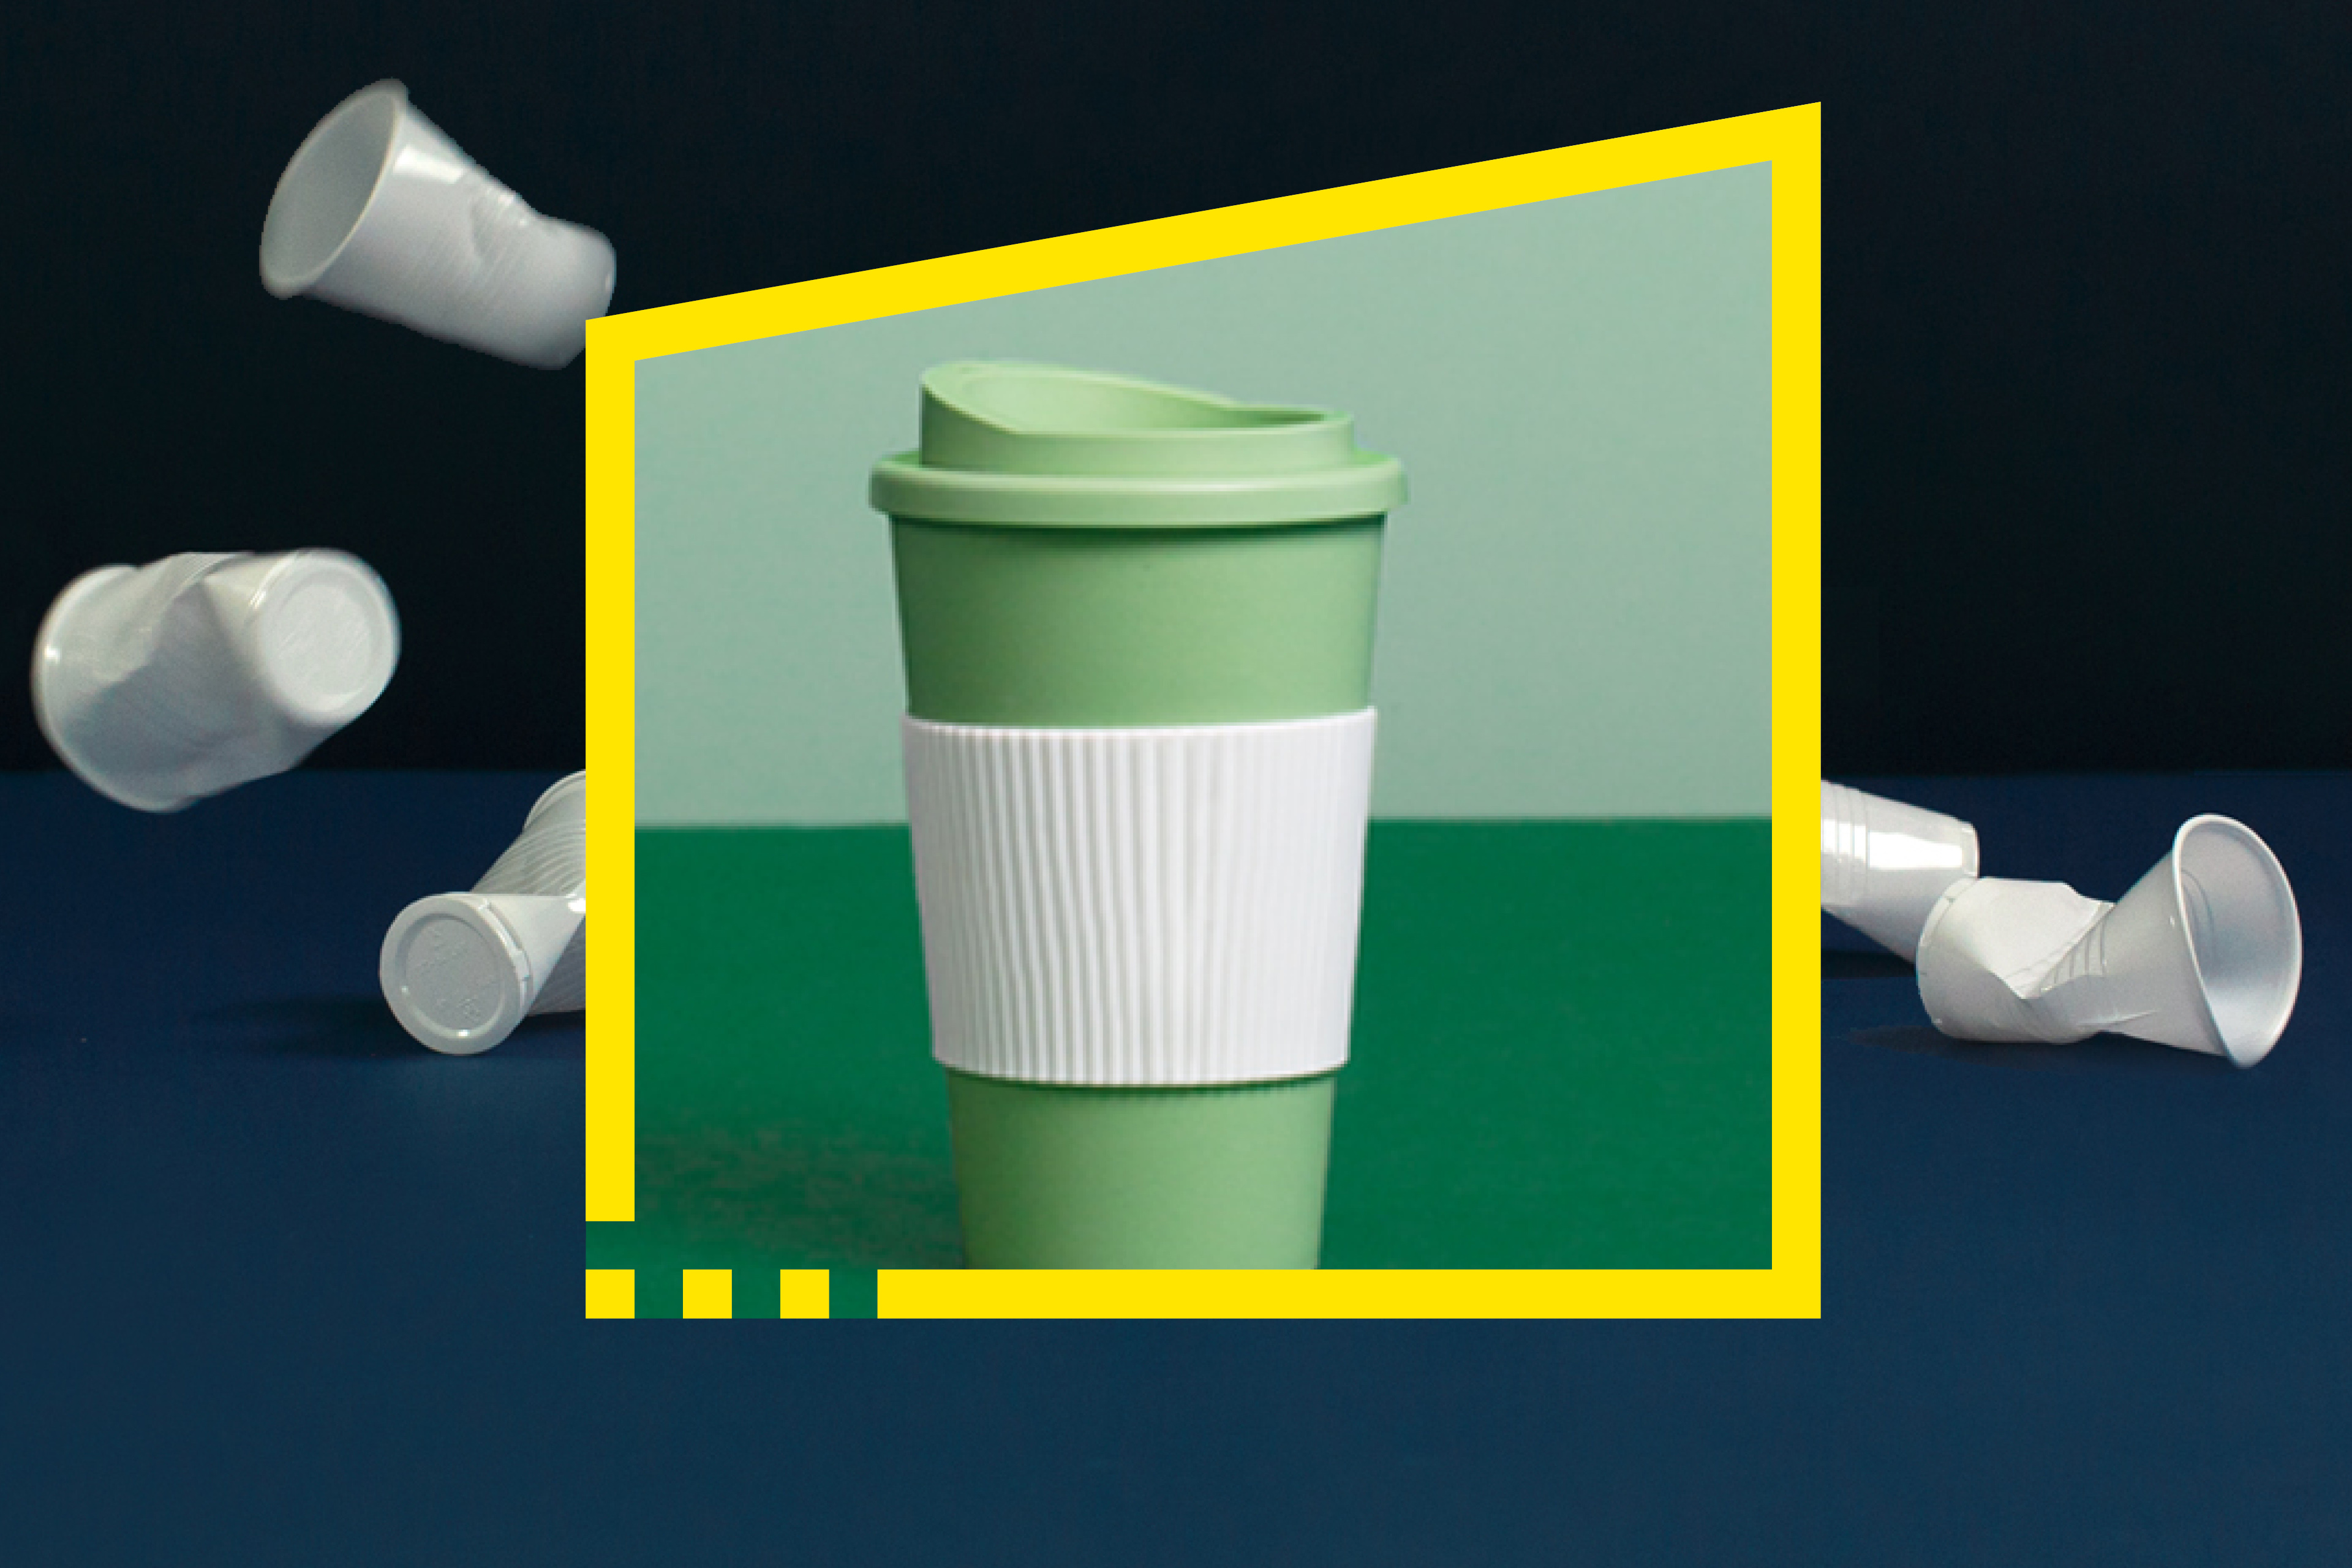 Image of plastic cups and and an sustainable flexible plastic package visualizing a sustainable future